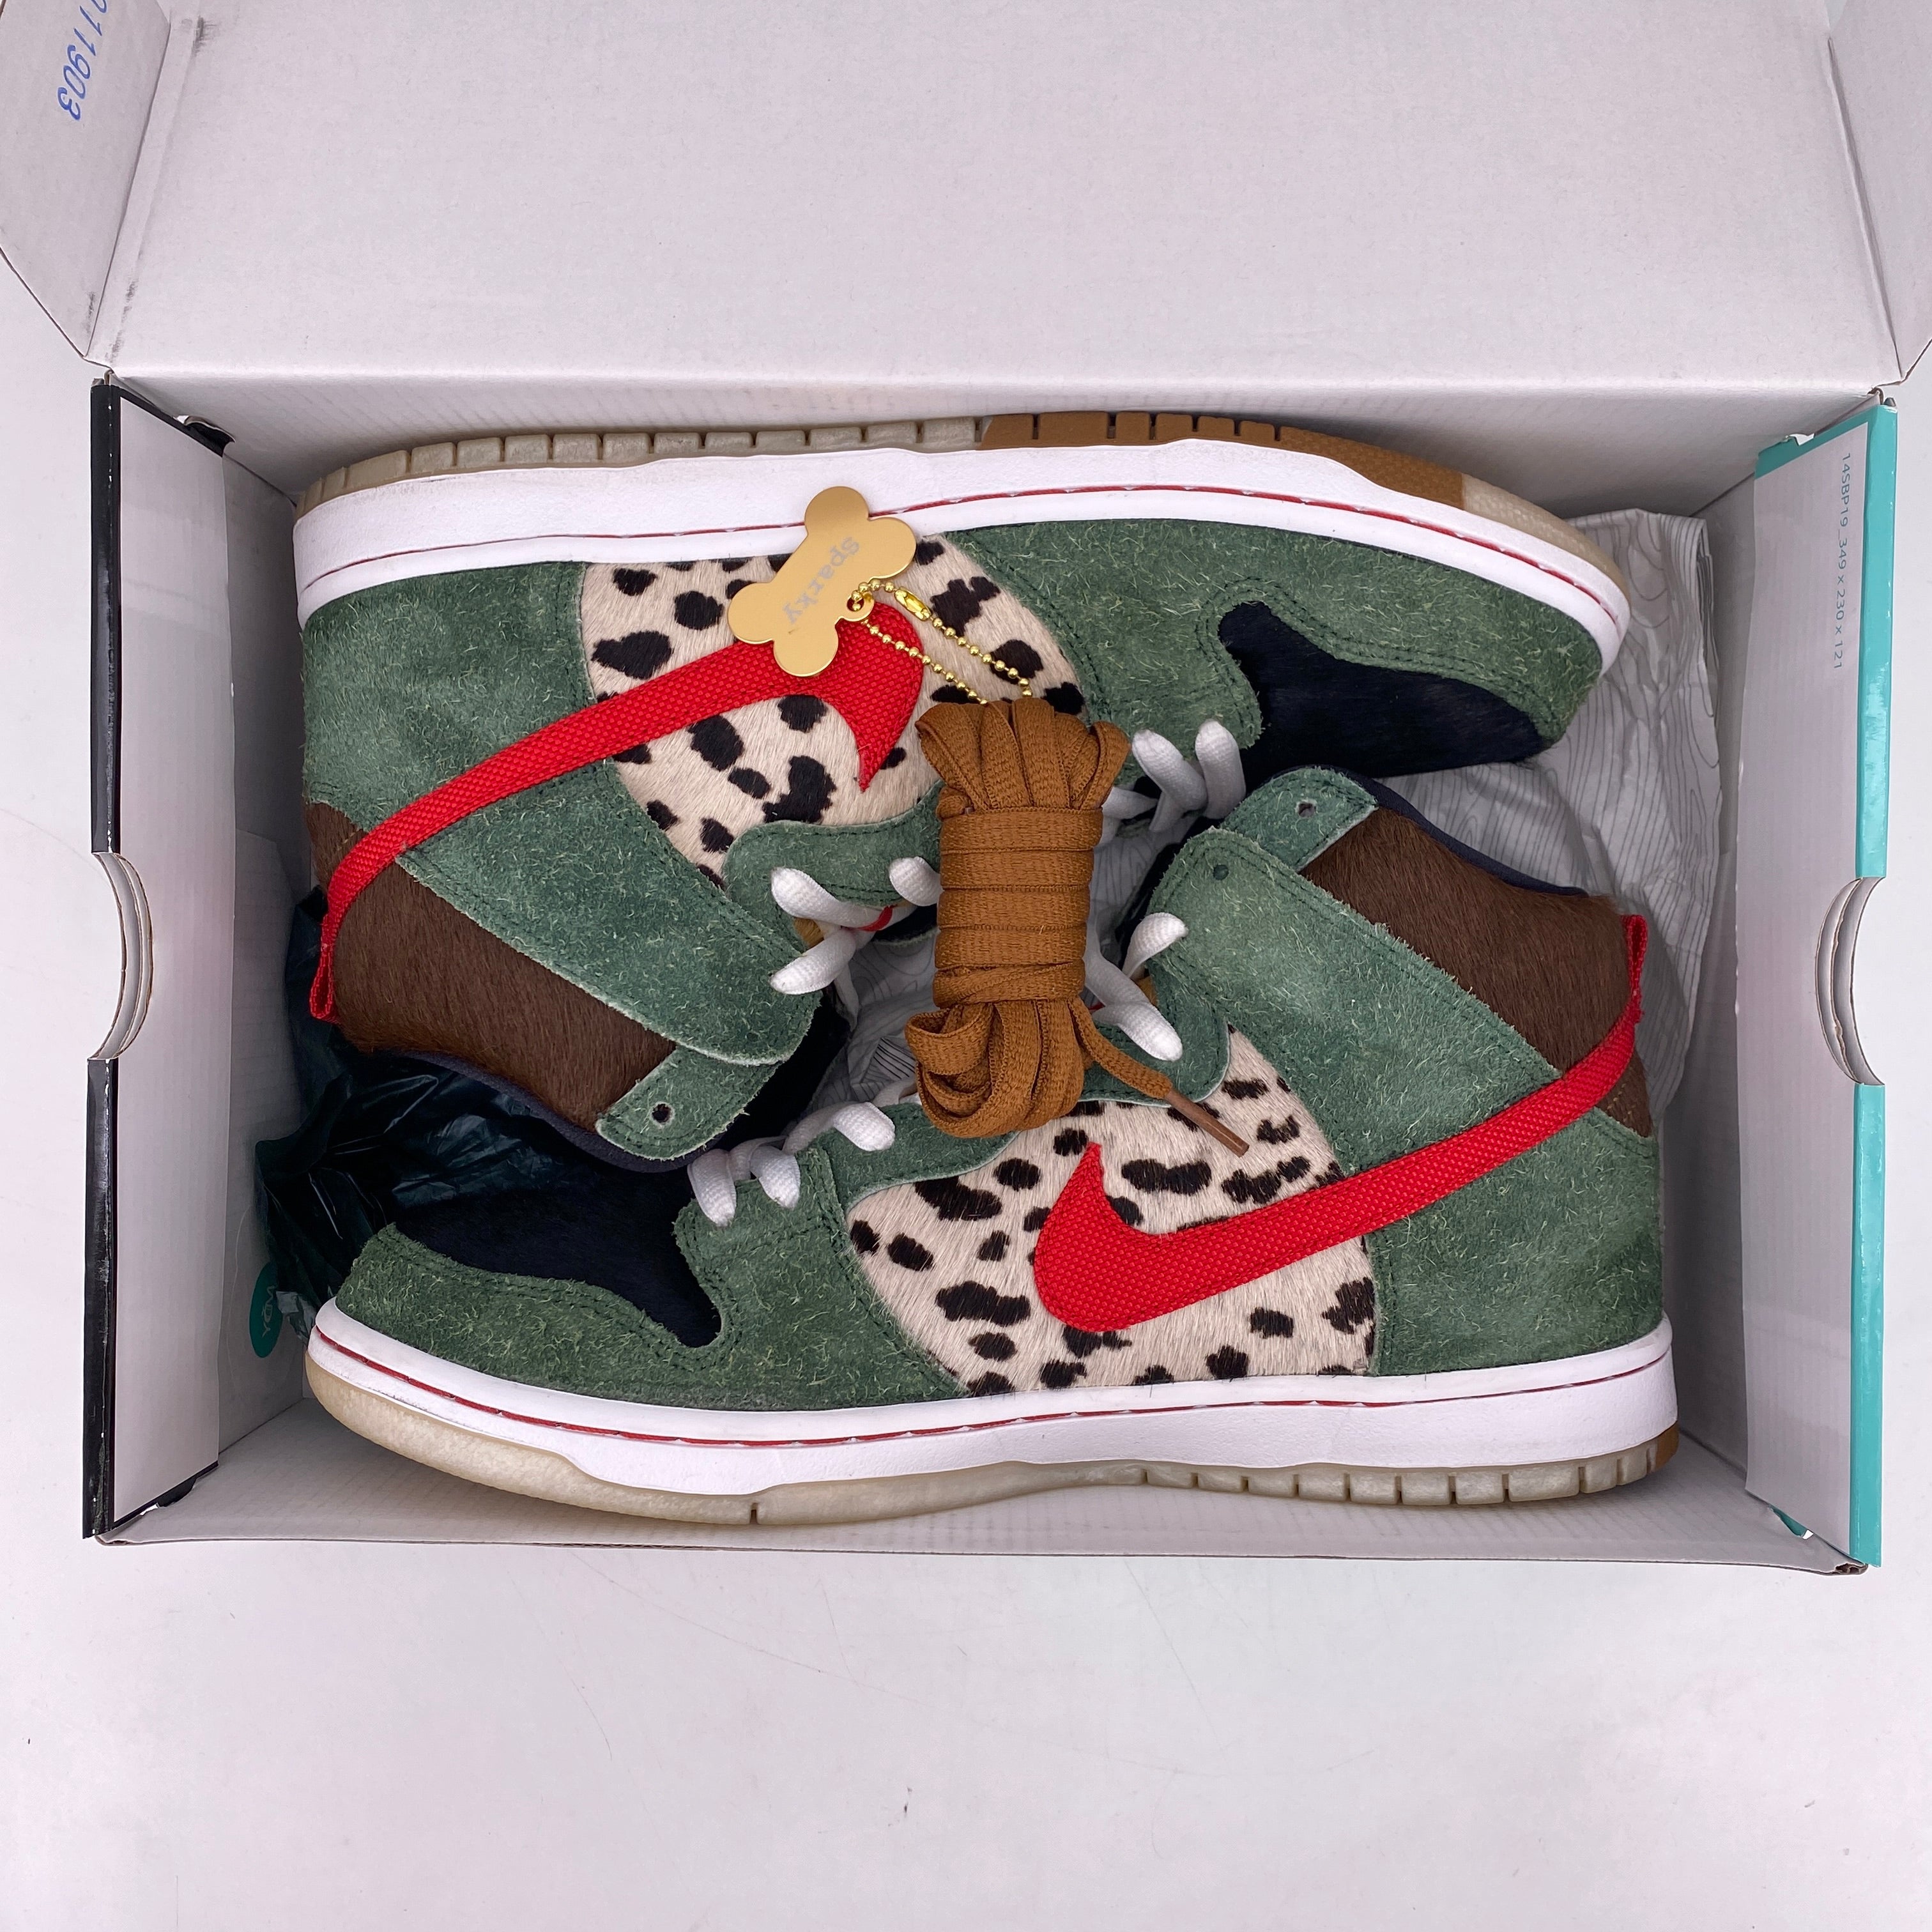 Nike SB Dunk High Pro &quot;Dog Walker&quot; 2019 Used Size 11